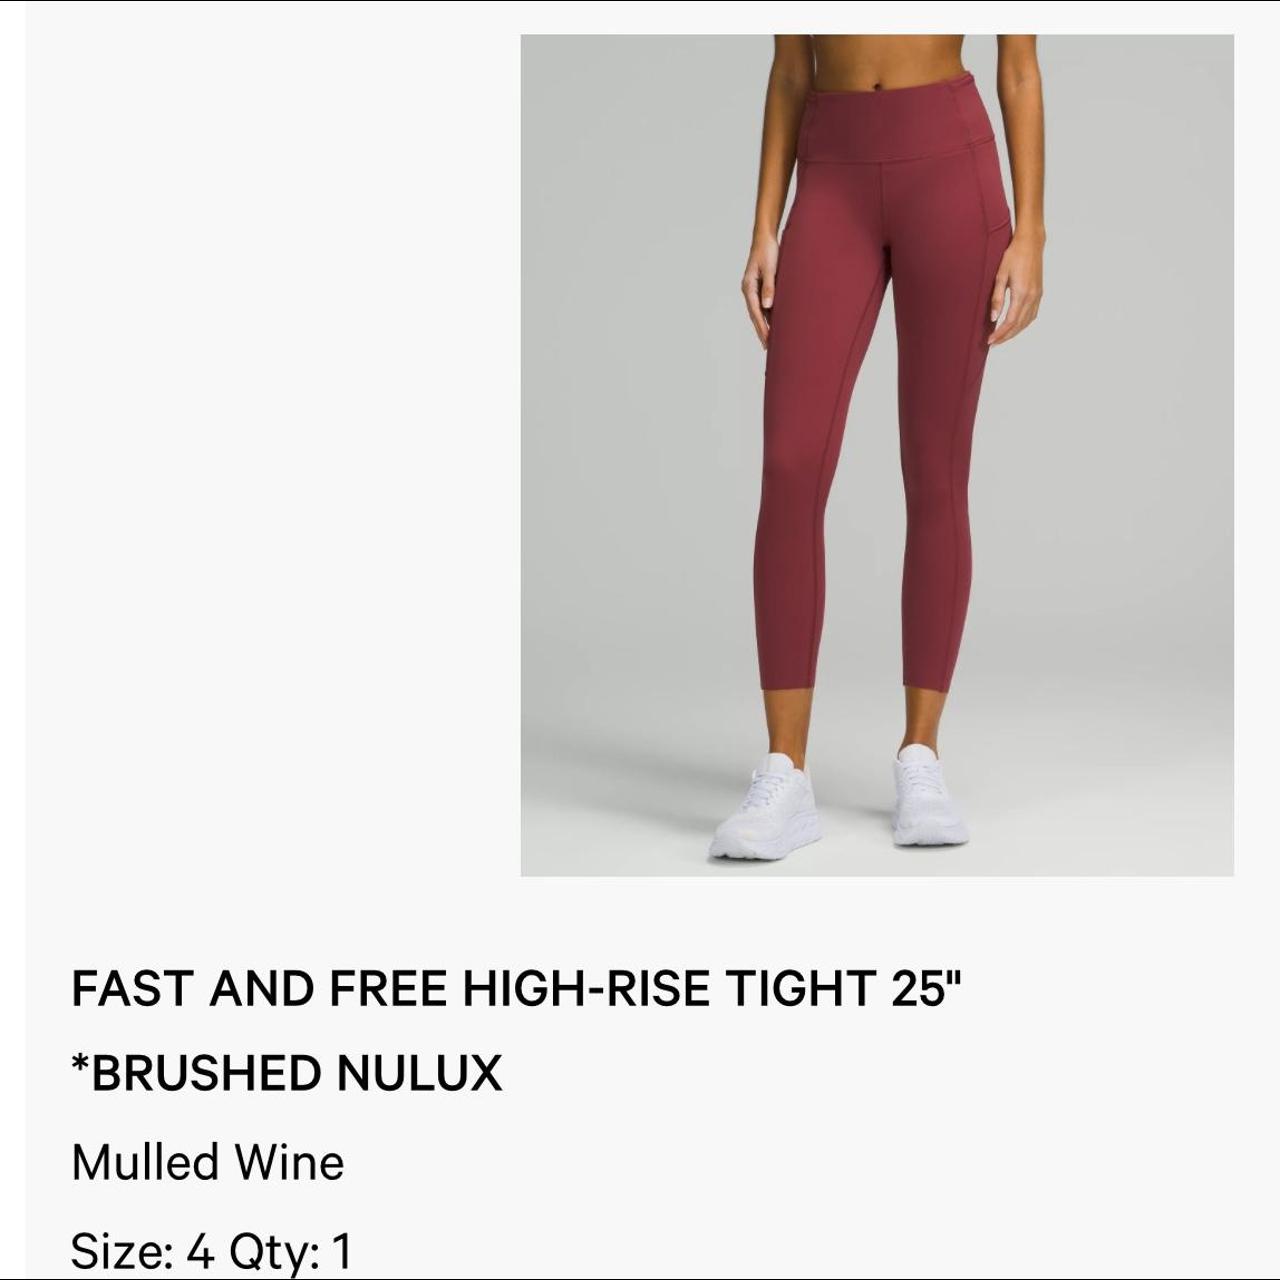 Lululemon Fast Free Size 4 High-Rise Tight 25” Brushed Nulux Mulled Wine